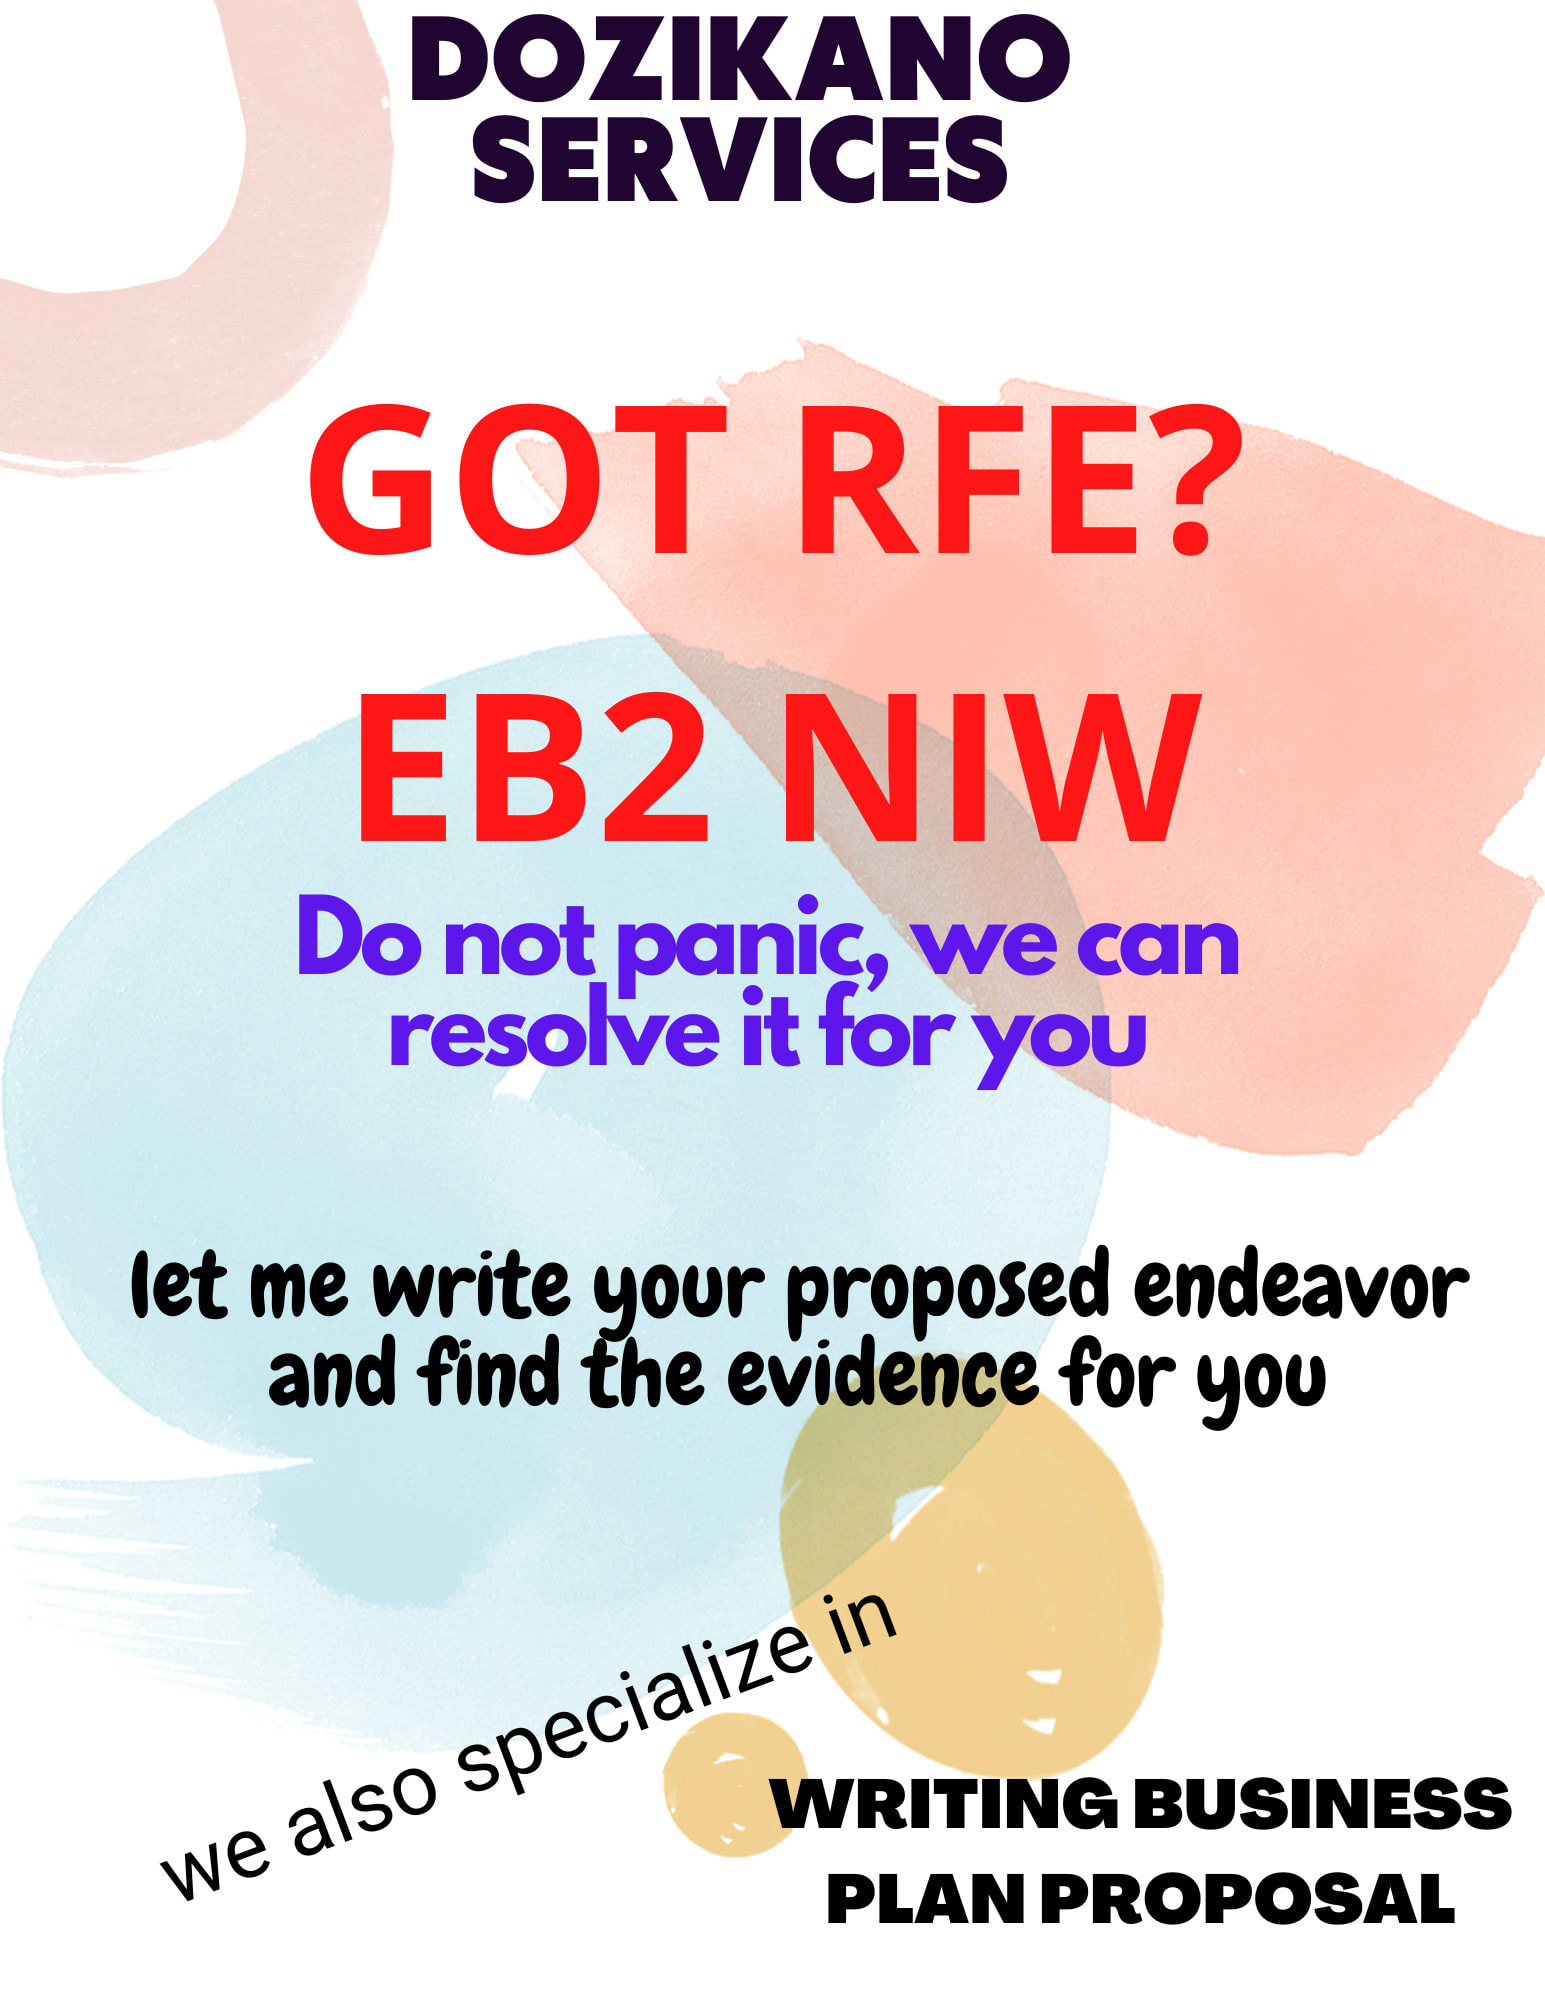 How a Professional EB2 NIW Business Plan Will Help You on Your